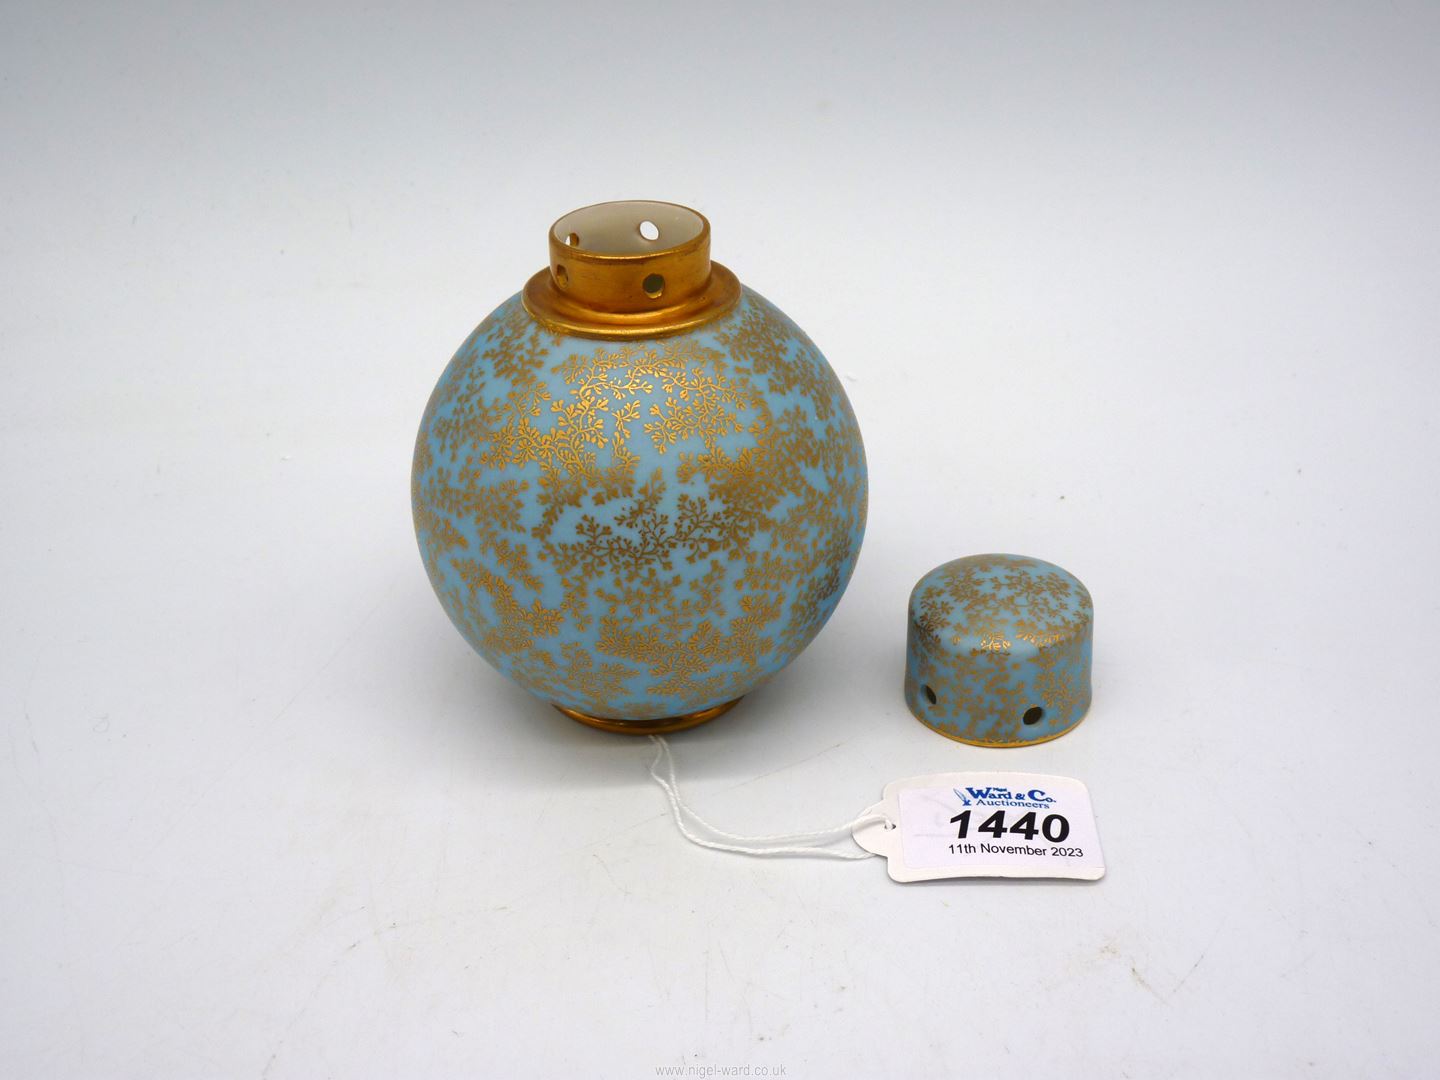 An unusual Royal Worcester porcelain spherical bottle and cover pot pourri in turquoise blue and - Image 2 of 3